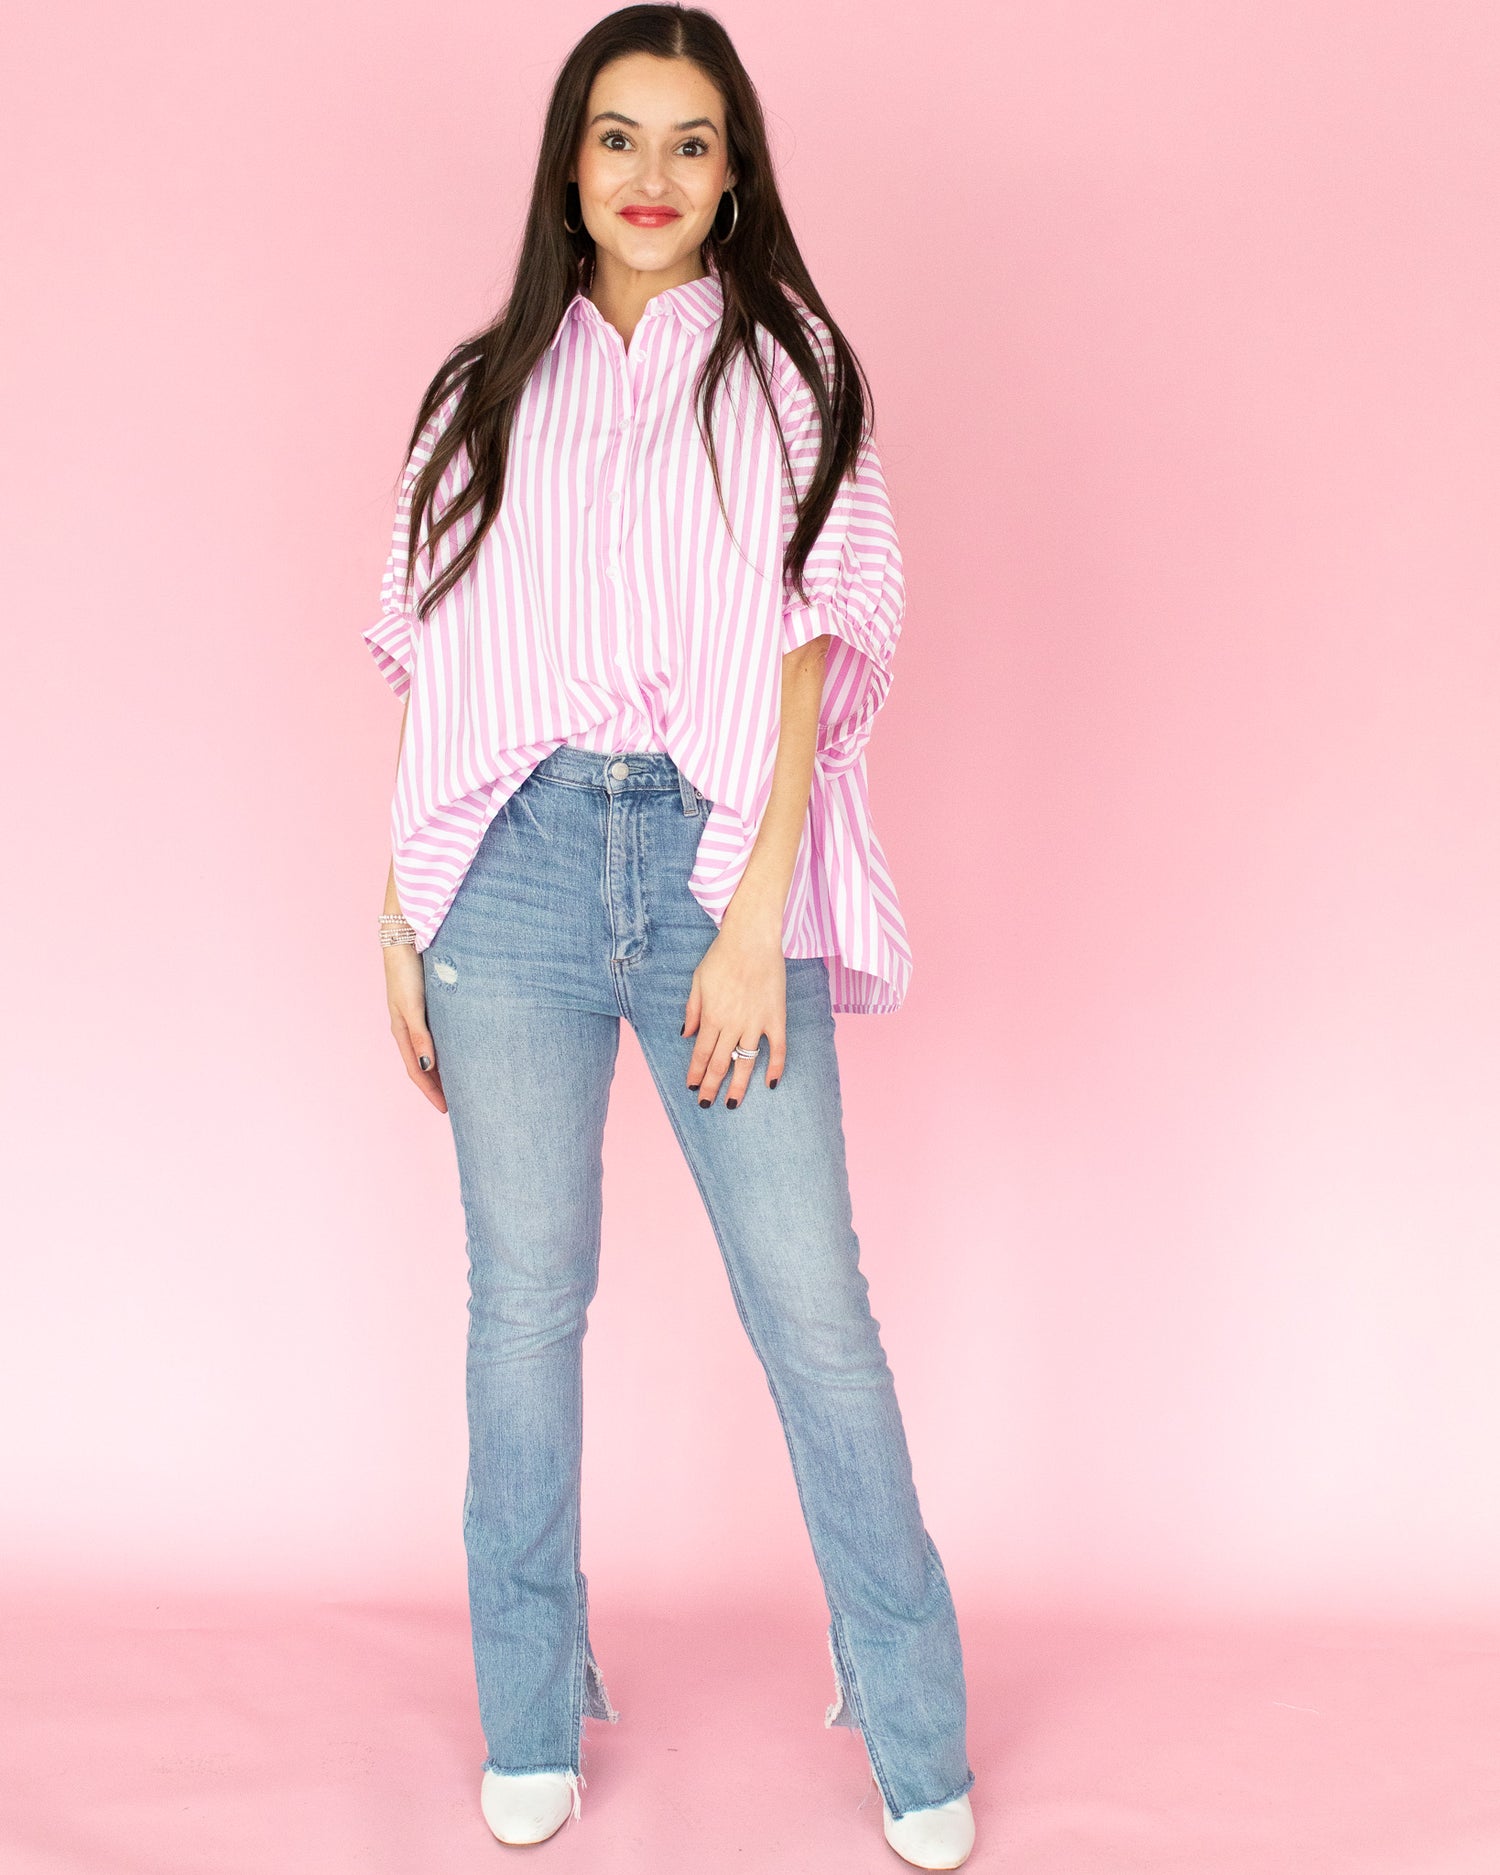 Oversized Striped Button Down - Pink